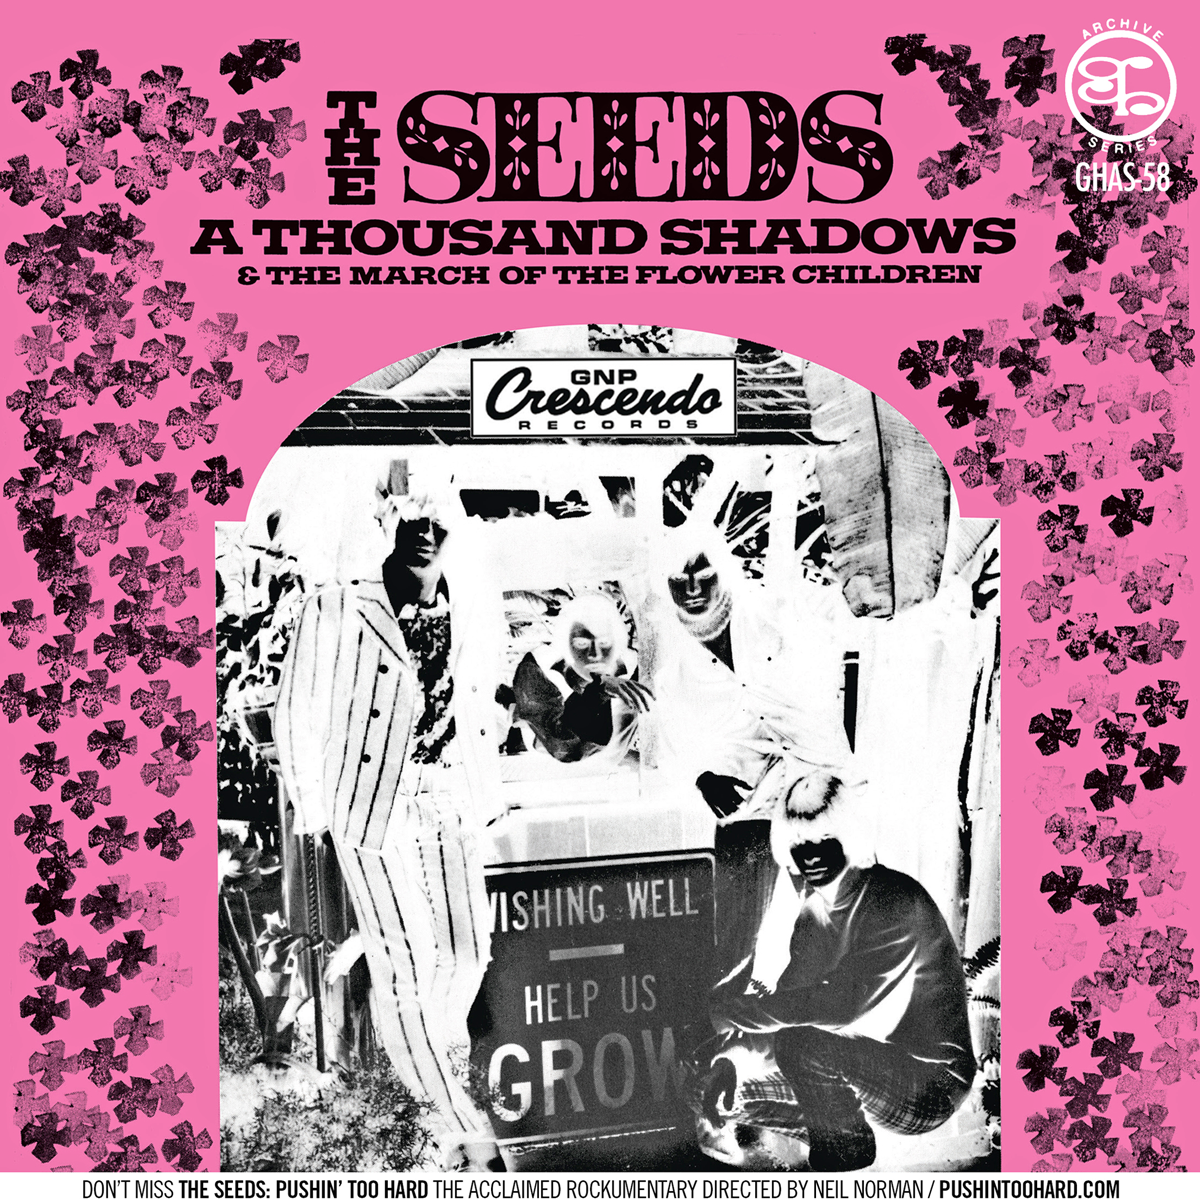 Seeds- A Thousand Shadows 7" ~RARE UNEARTHED RECORDINGS FROM 1967!